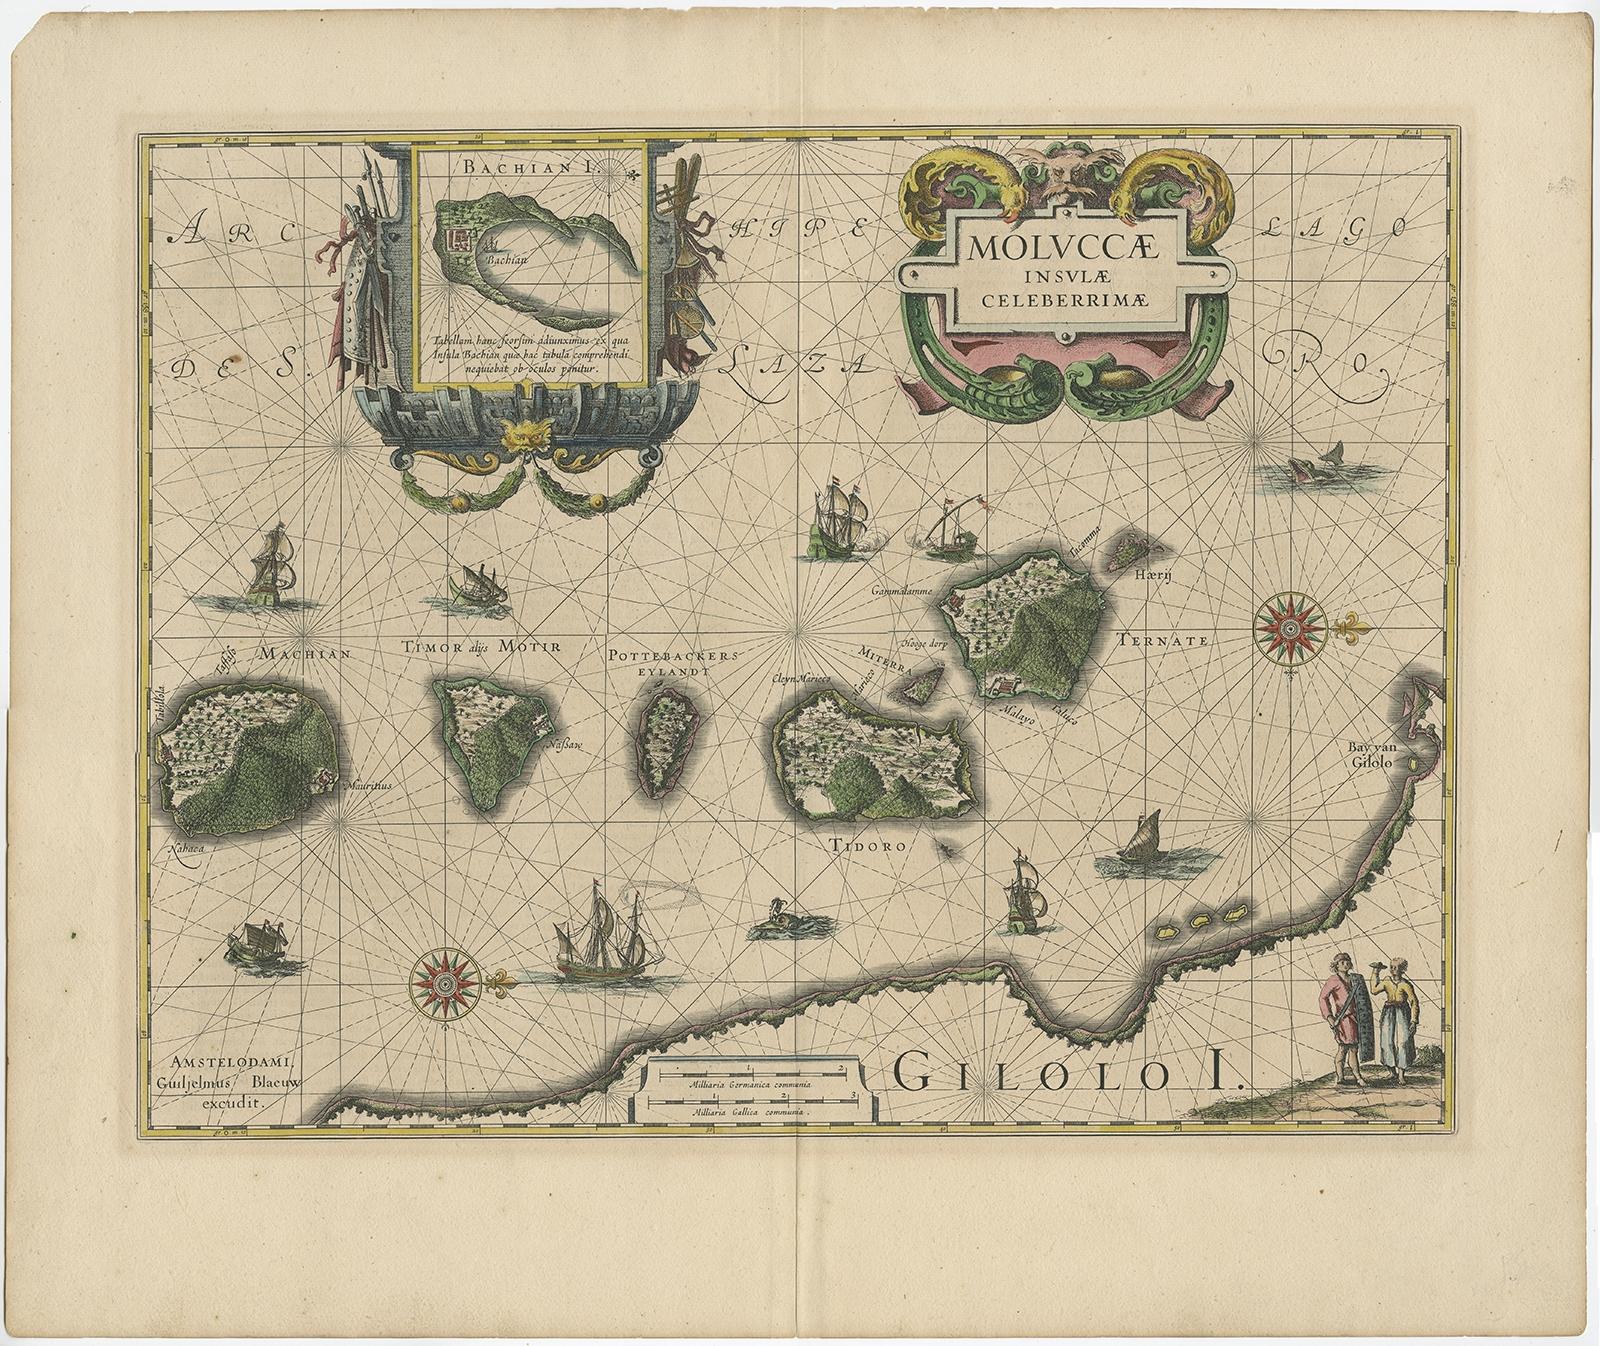 Antique map titled 'Moluccae Insulae Celeberrimae'. 

Decorative map of the Maluku Islands, also known as the Moluccas or the Spice Islands. Inset of the island of Bachian (Batjan) in an elaborate frame as well as a Moluccan couple in the lower